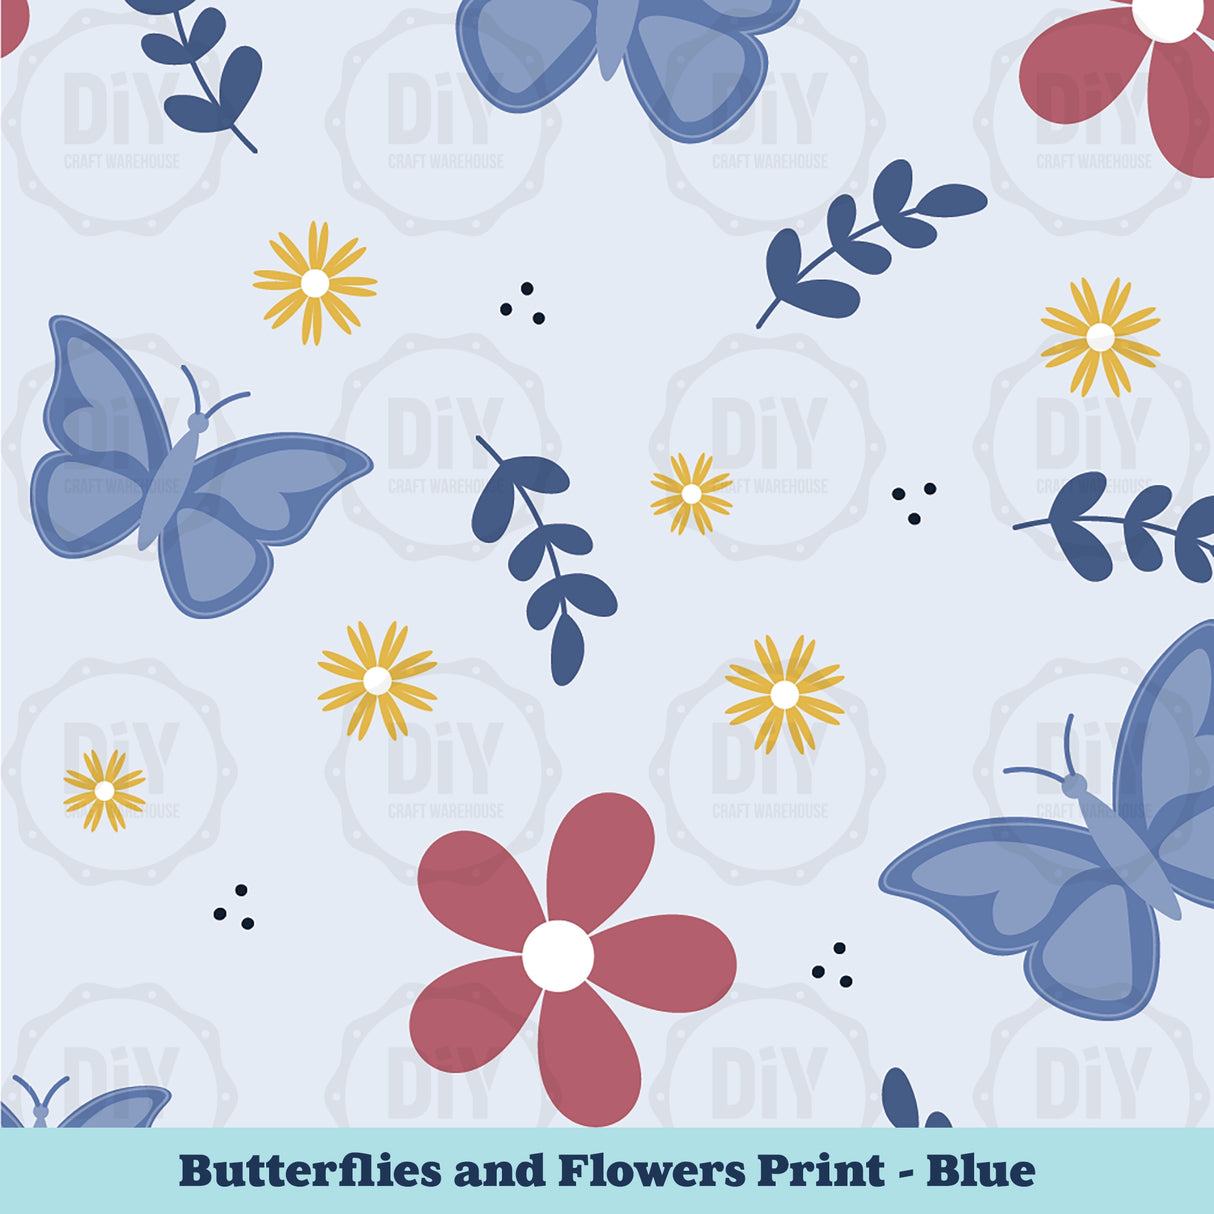 Butterflies and Flowers Sublimation Transfer - Blue